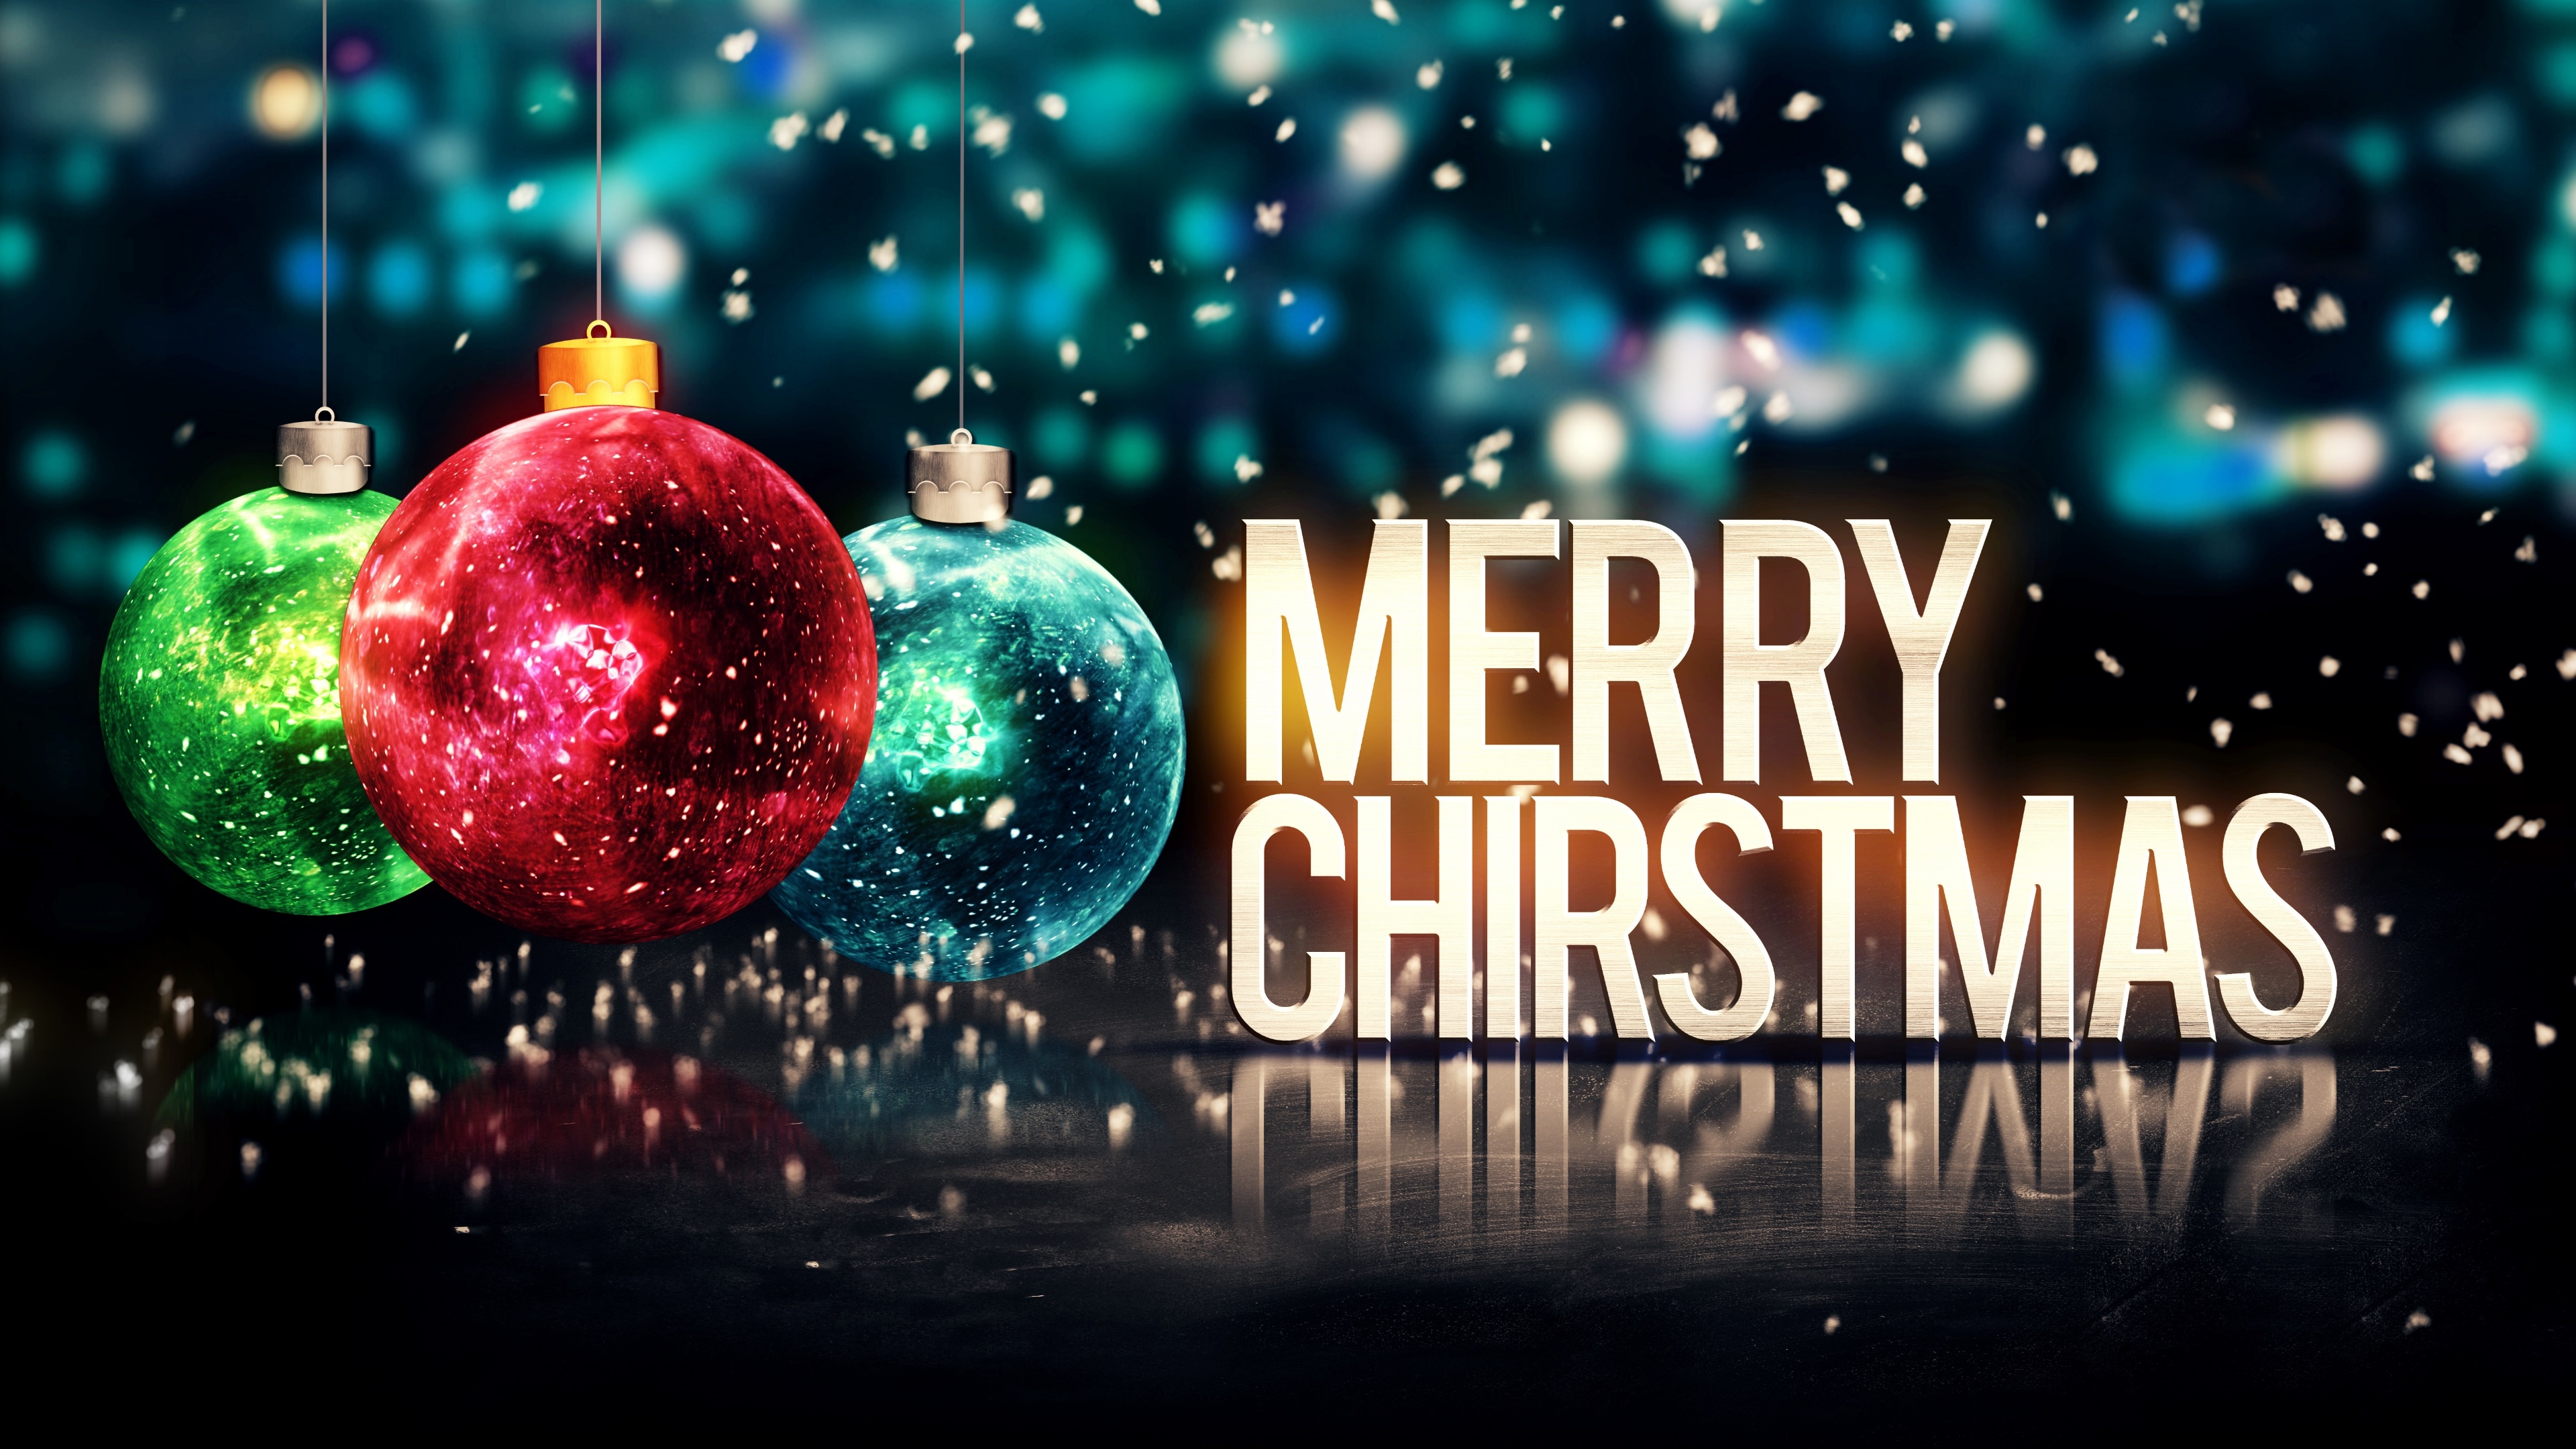 Merry Christmas Image Pictures Photos Wallpaper